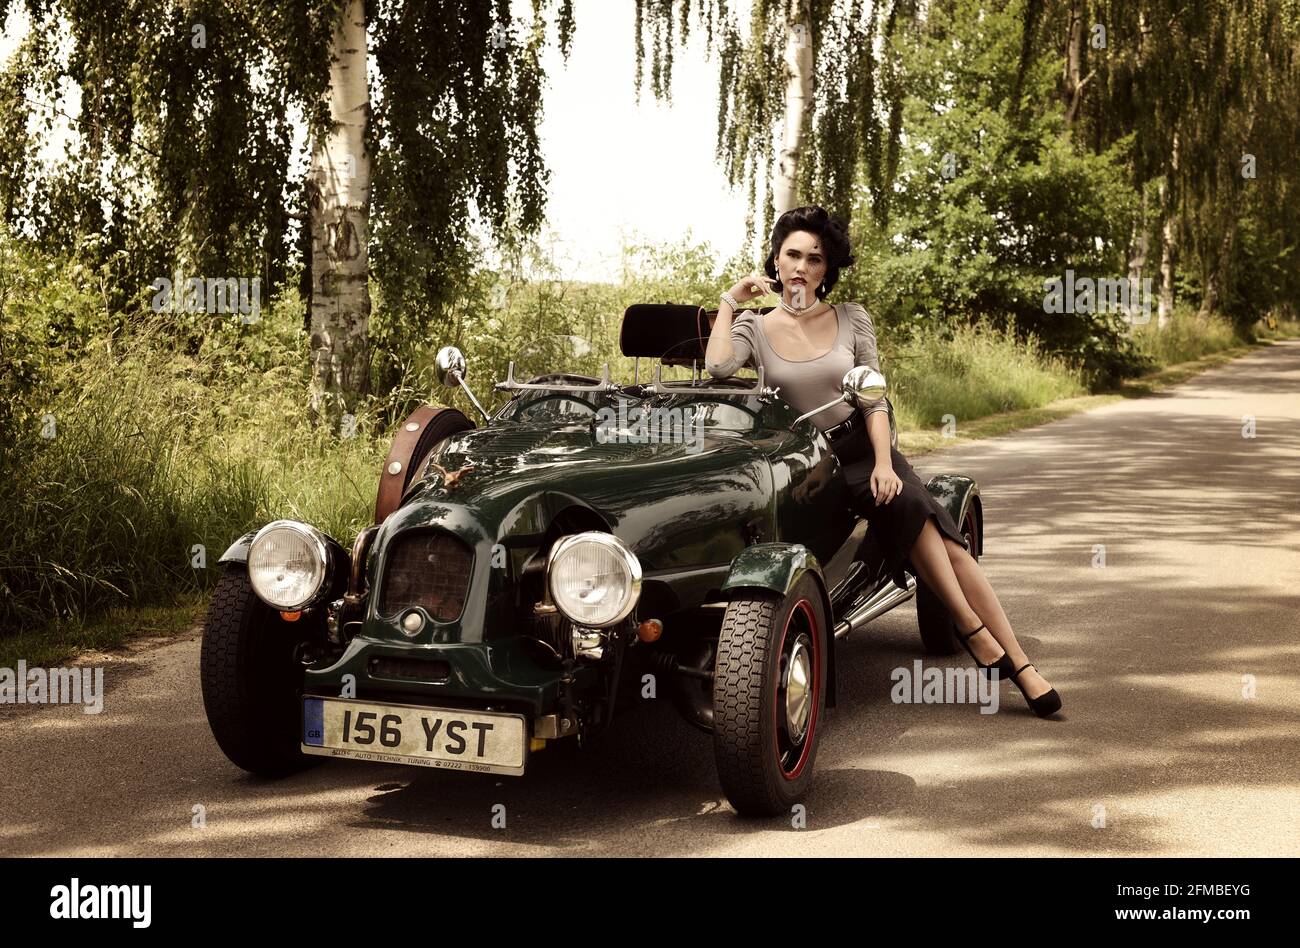 Young 1940s style woman with vintage car in British Racing Green Stock Photo